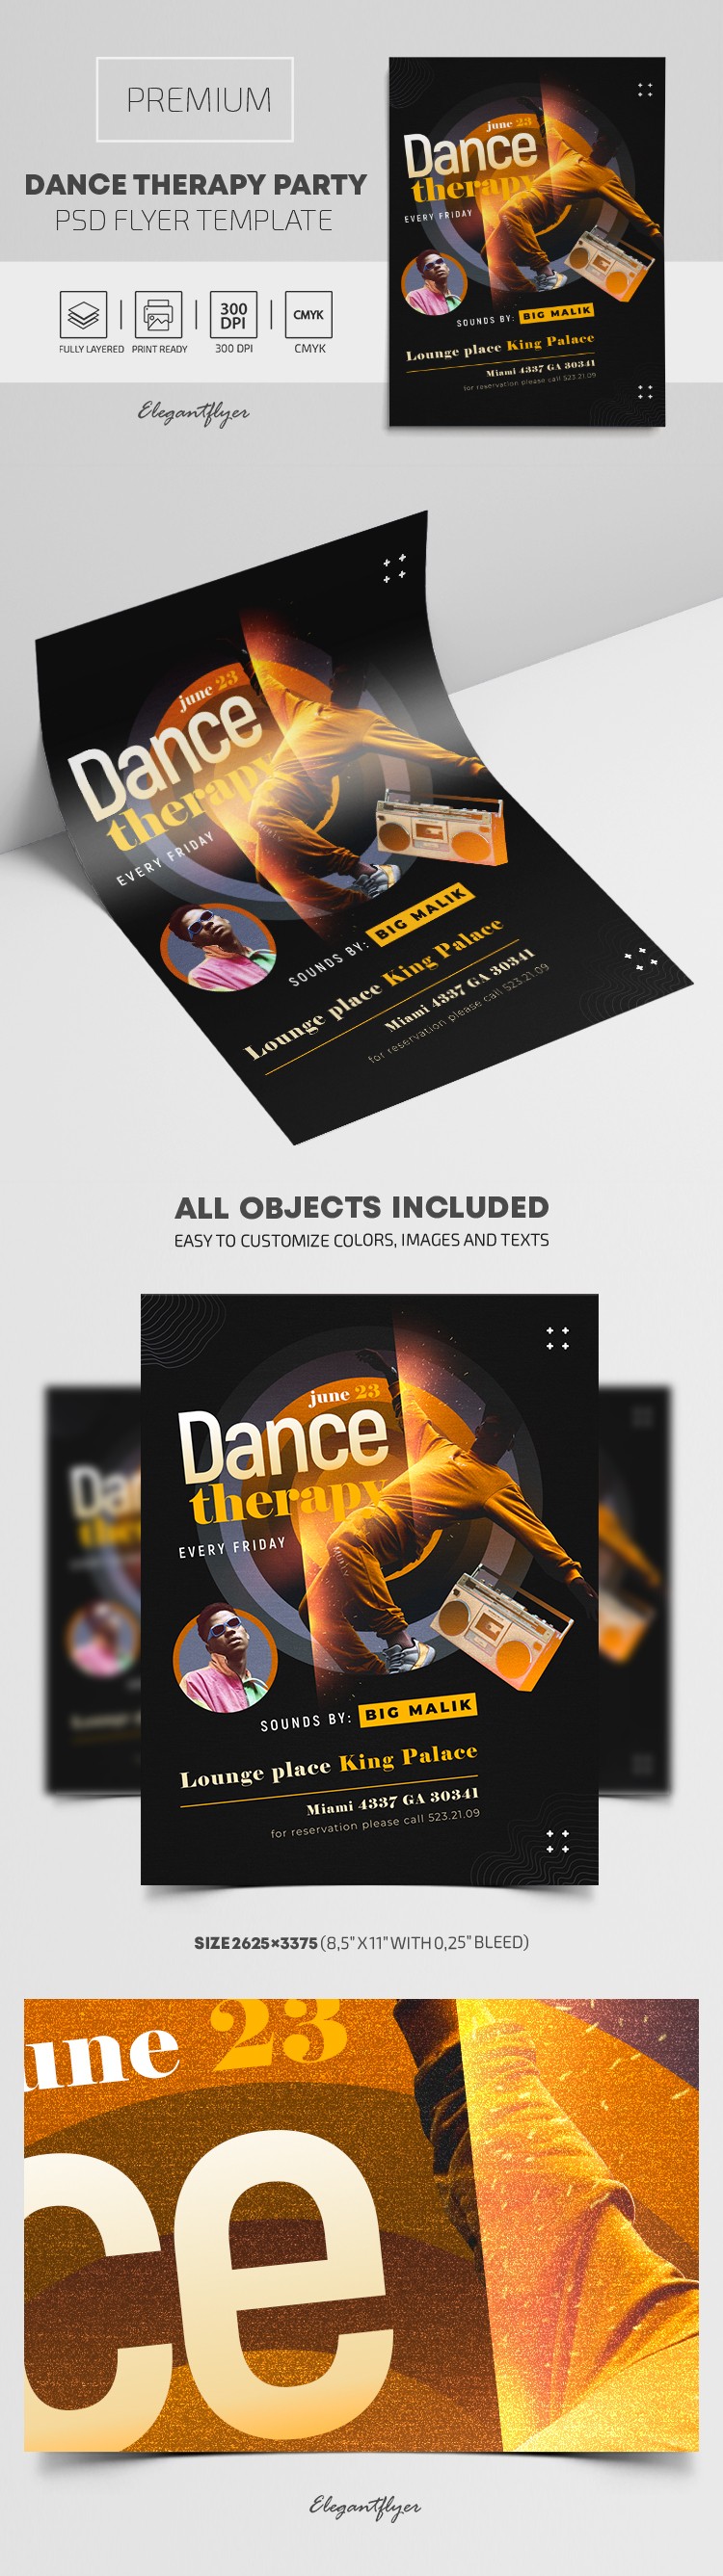 Dance Therapy Party Flyer by ElegantFlyer